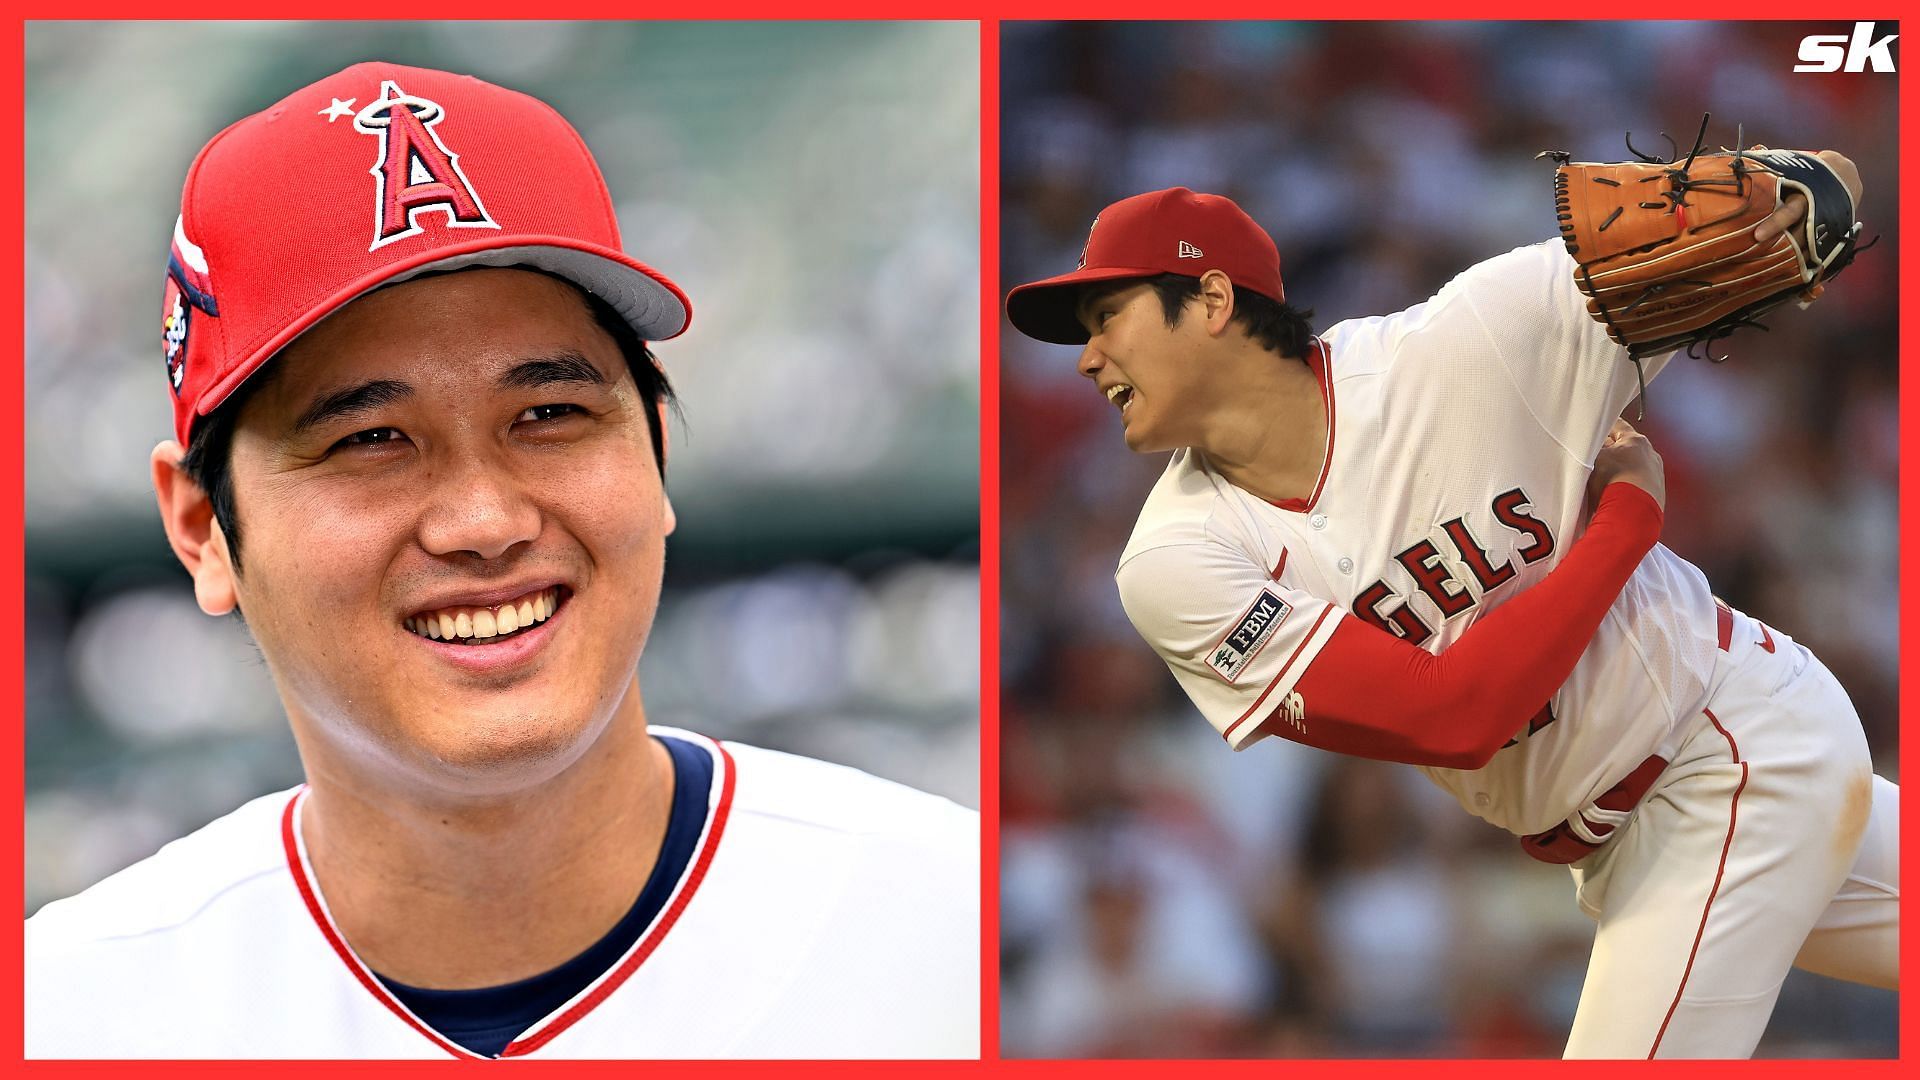 What happened to Shohei Ohtani? Latest updates as Angels star